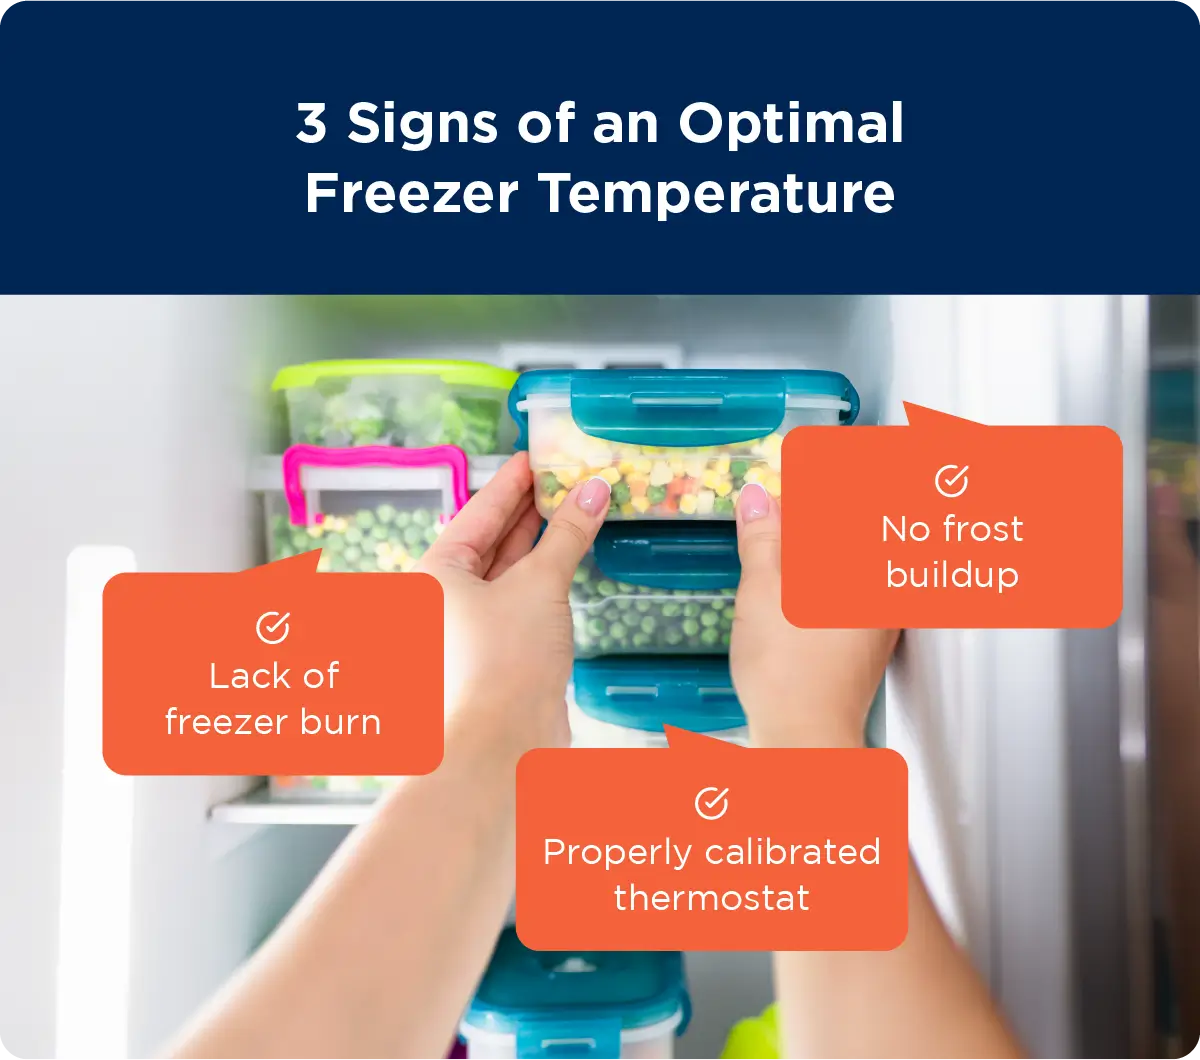 3 signs of an optimal freezer temperature